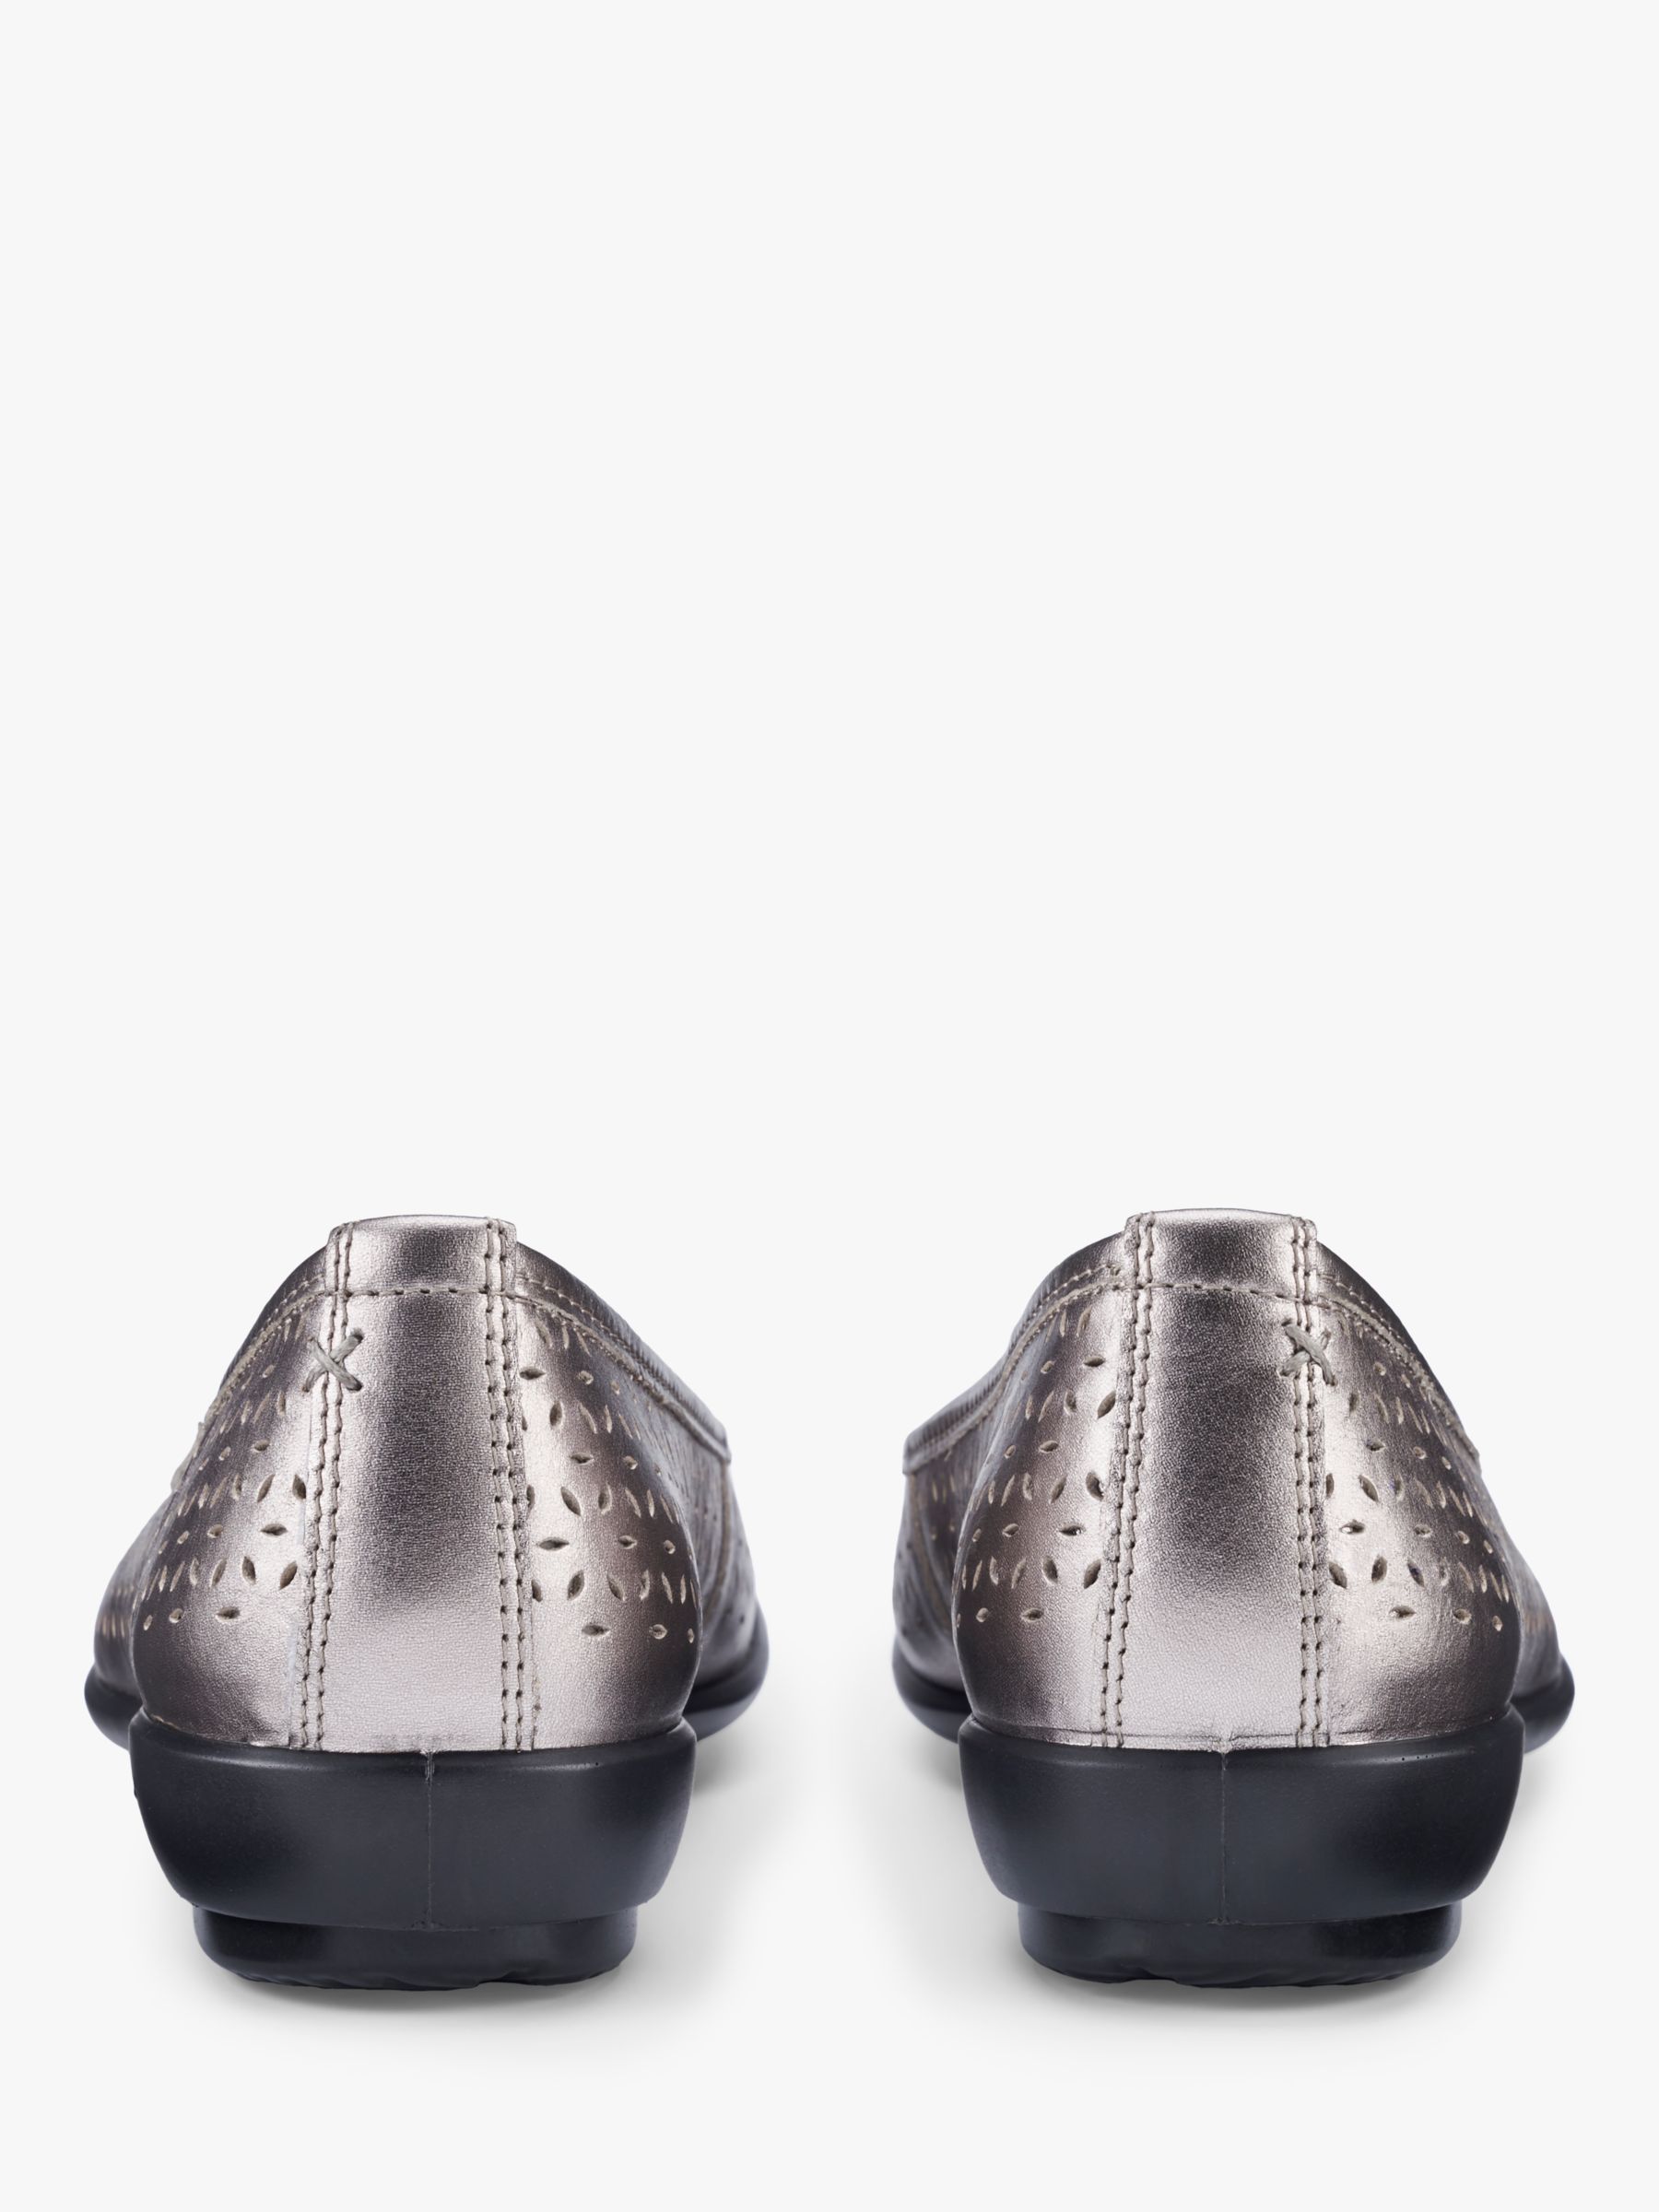 Buy Hotter Livvy II Perforated Leather Pumps, Pewter Online at johnlewis.com